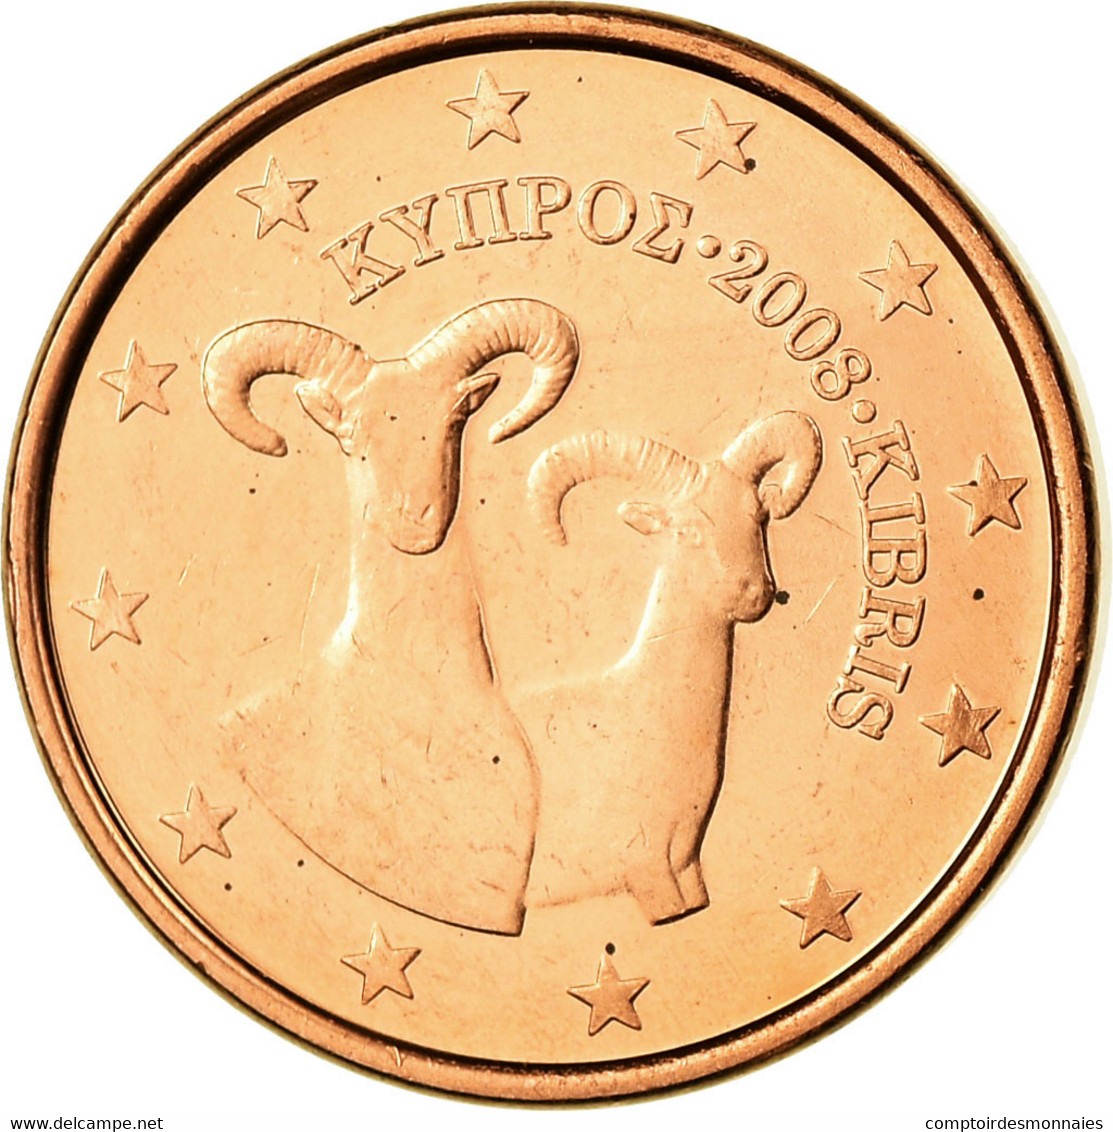 Chypre, Euro Cent, 2008, FDC, Copper Plated Steel, KM:78 - Cyprus